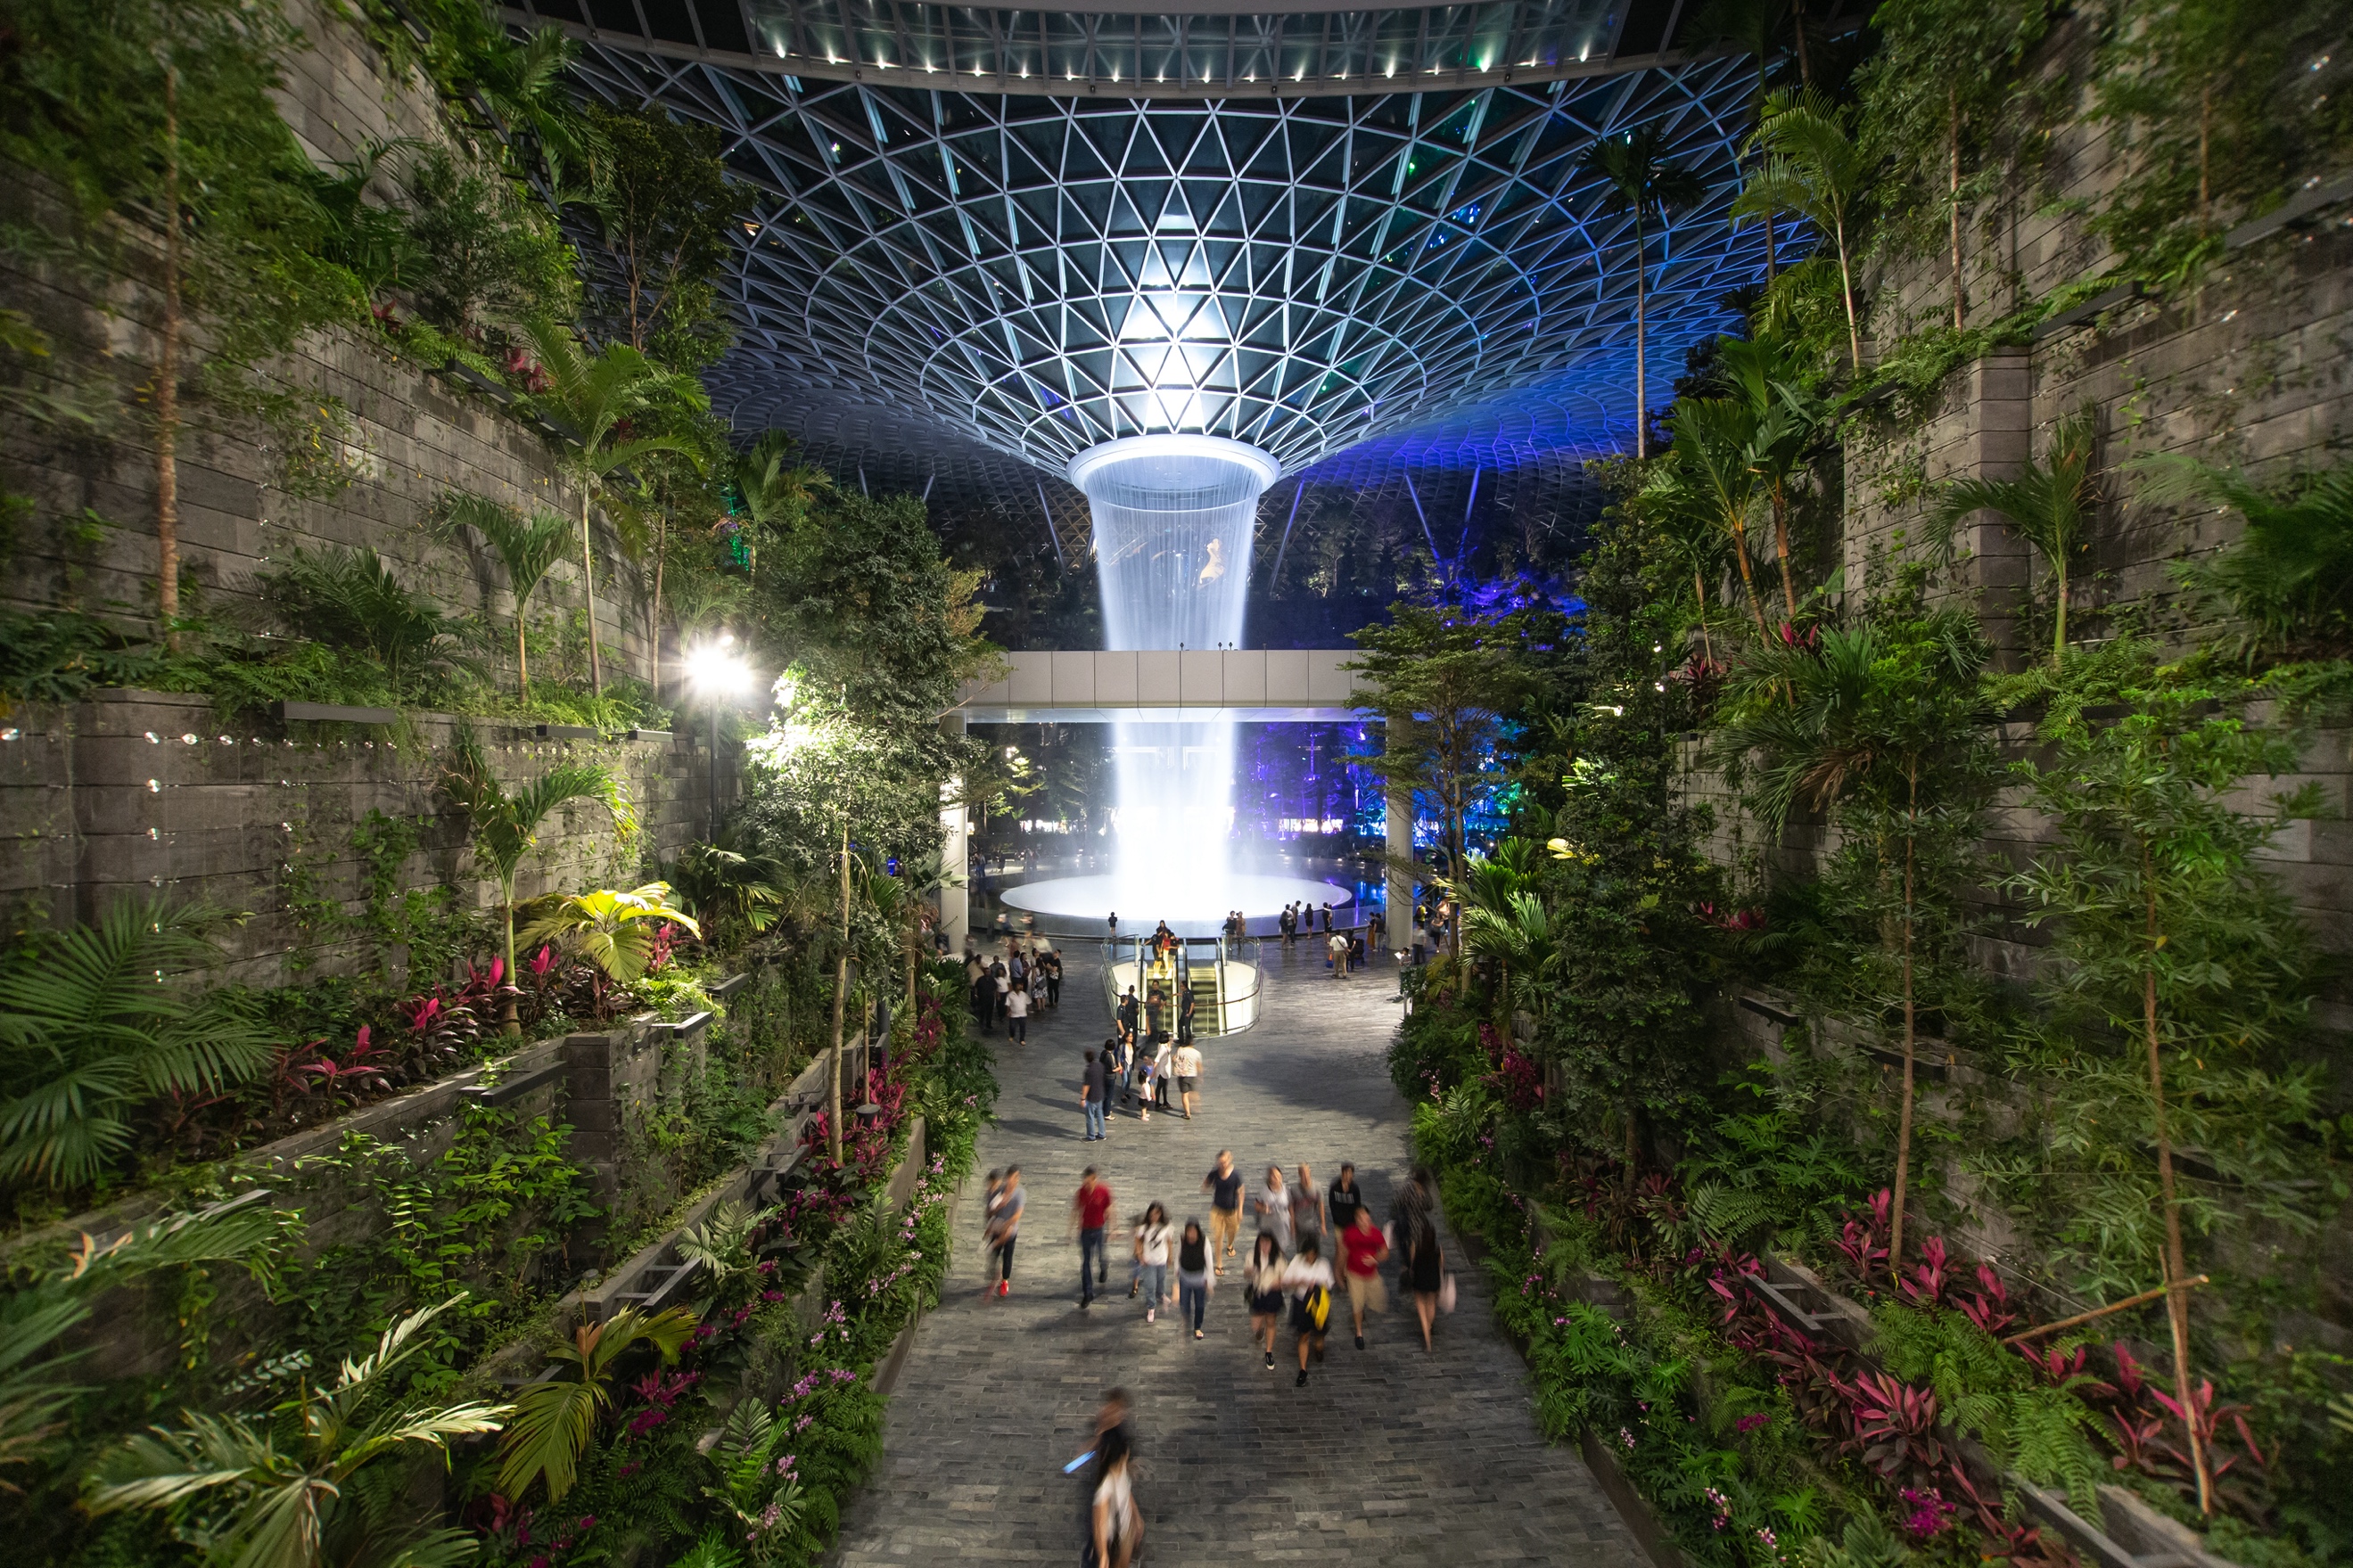 Changi Jewel, showing the indoor waterfall and laser show